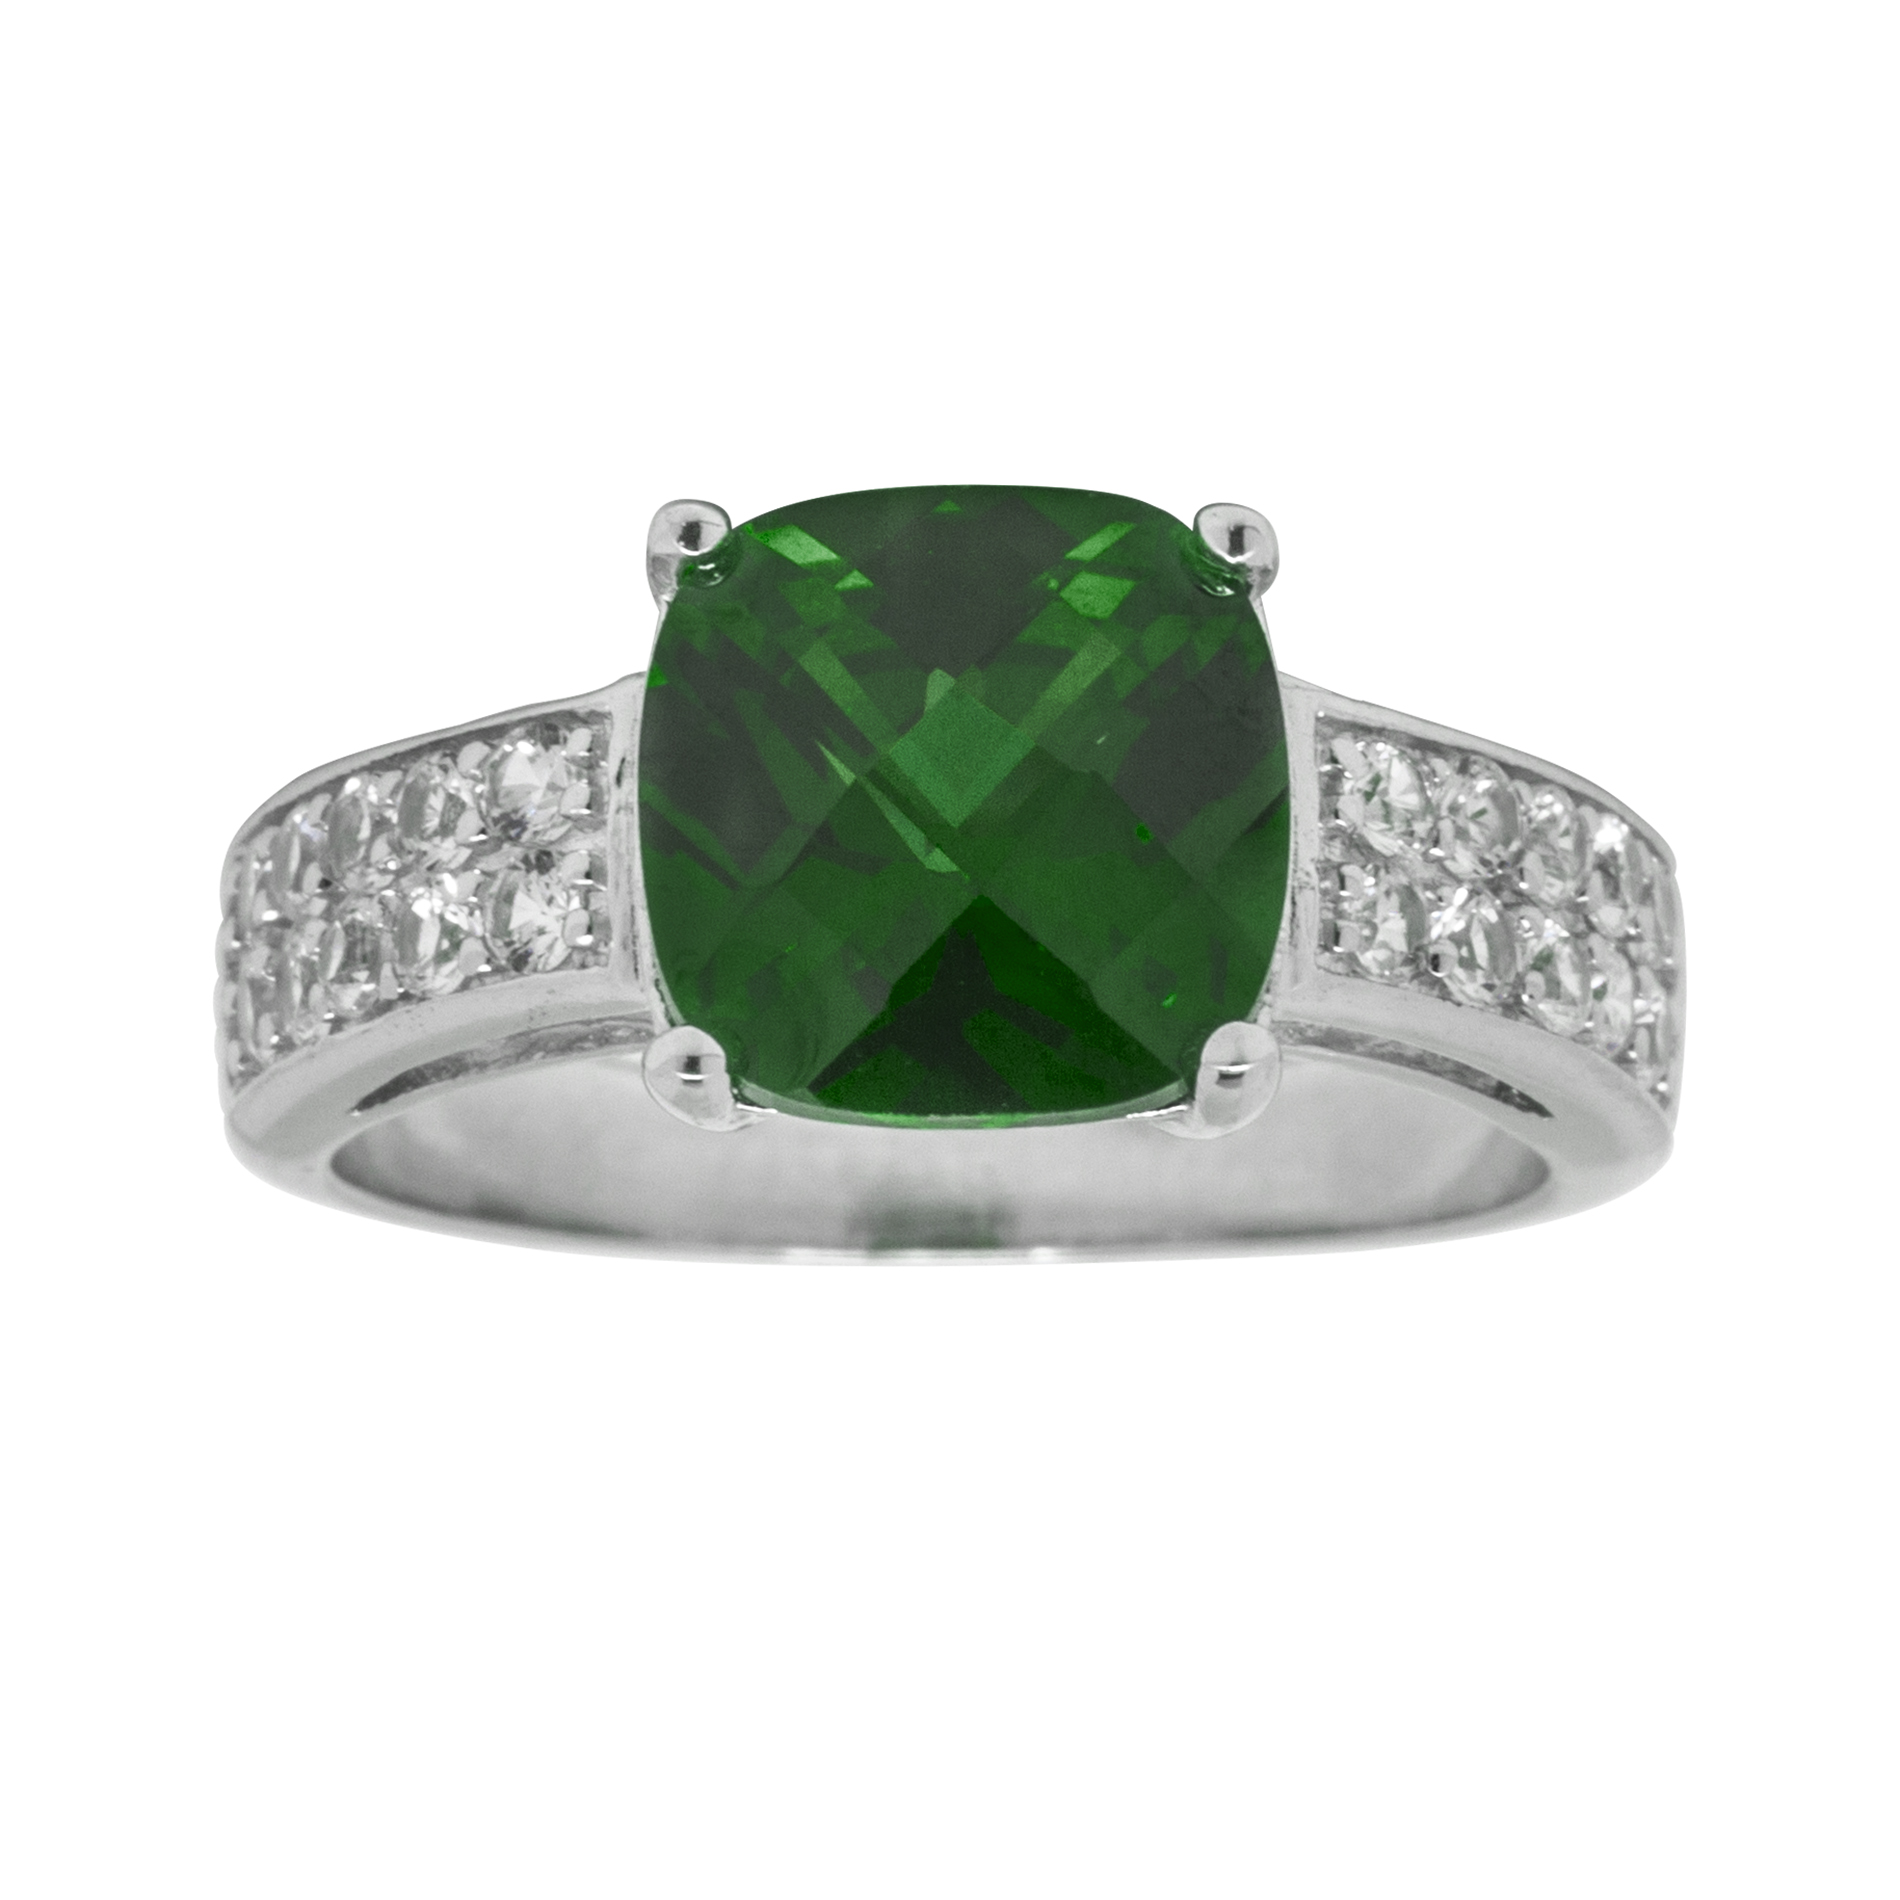 Simulated Emerald Cushion Ring Sterling Silver